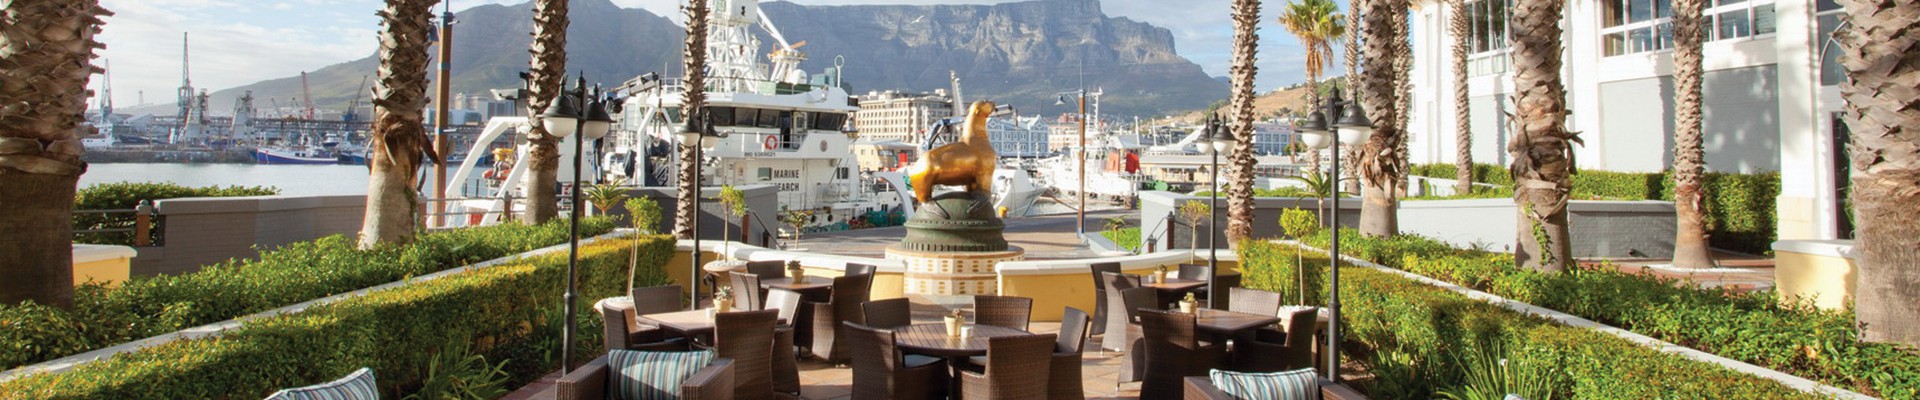 5* The Table Bay - Cape Town V&A Waterfront Package (2 Nights)